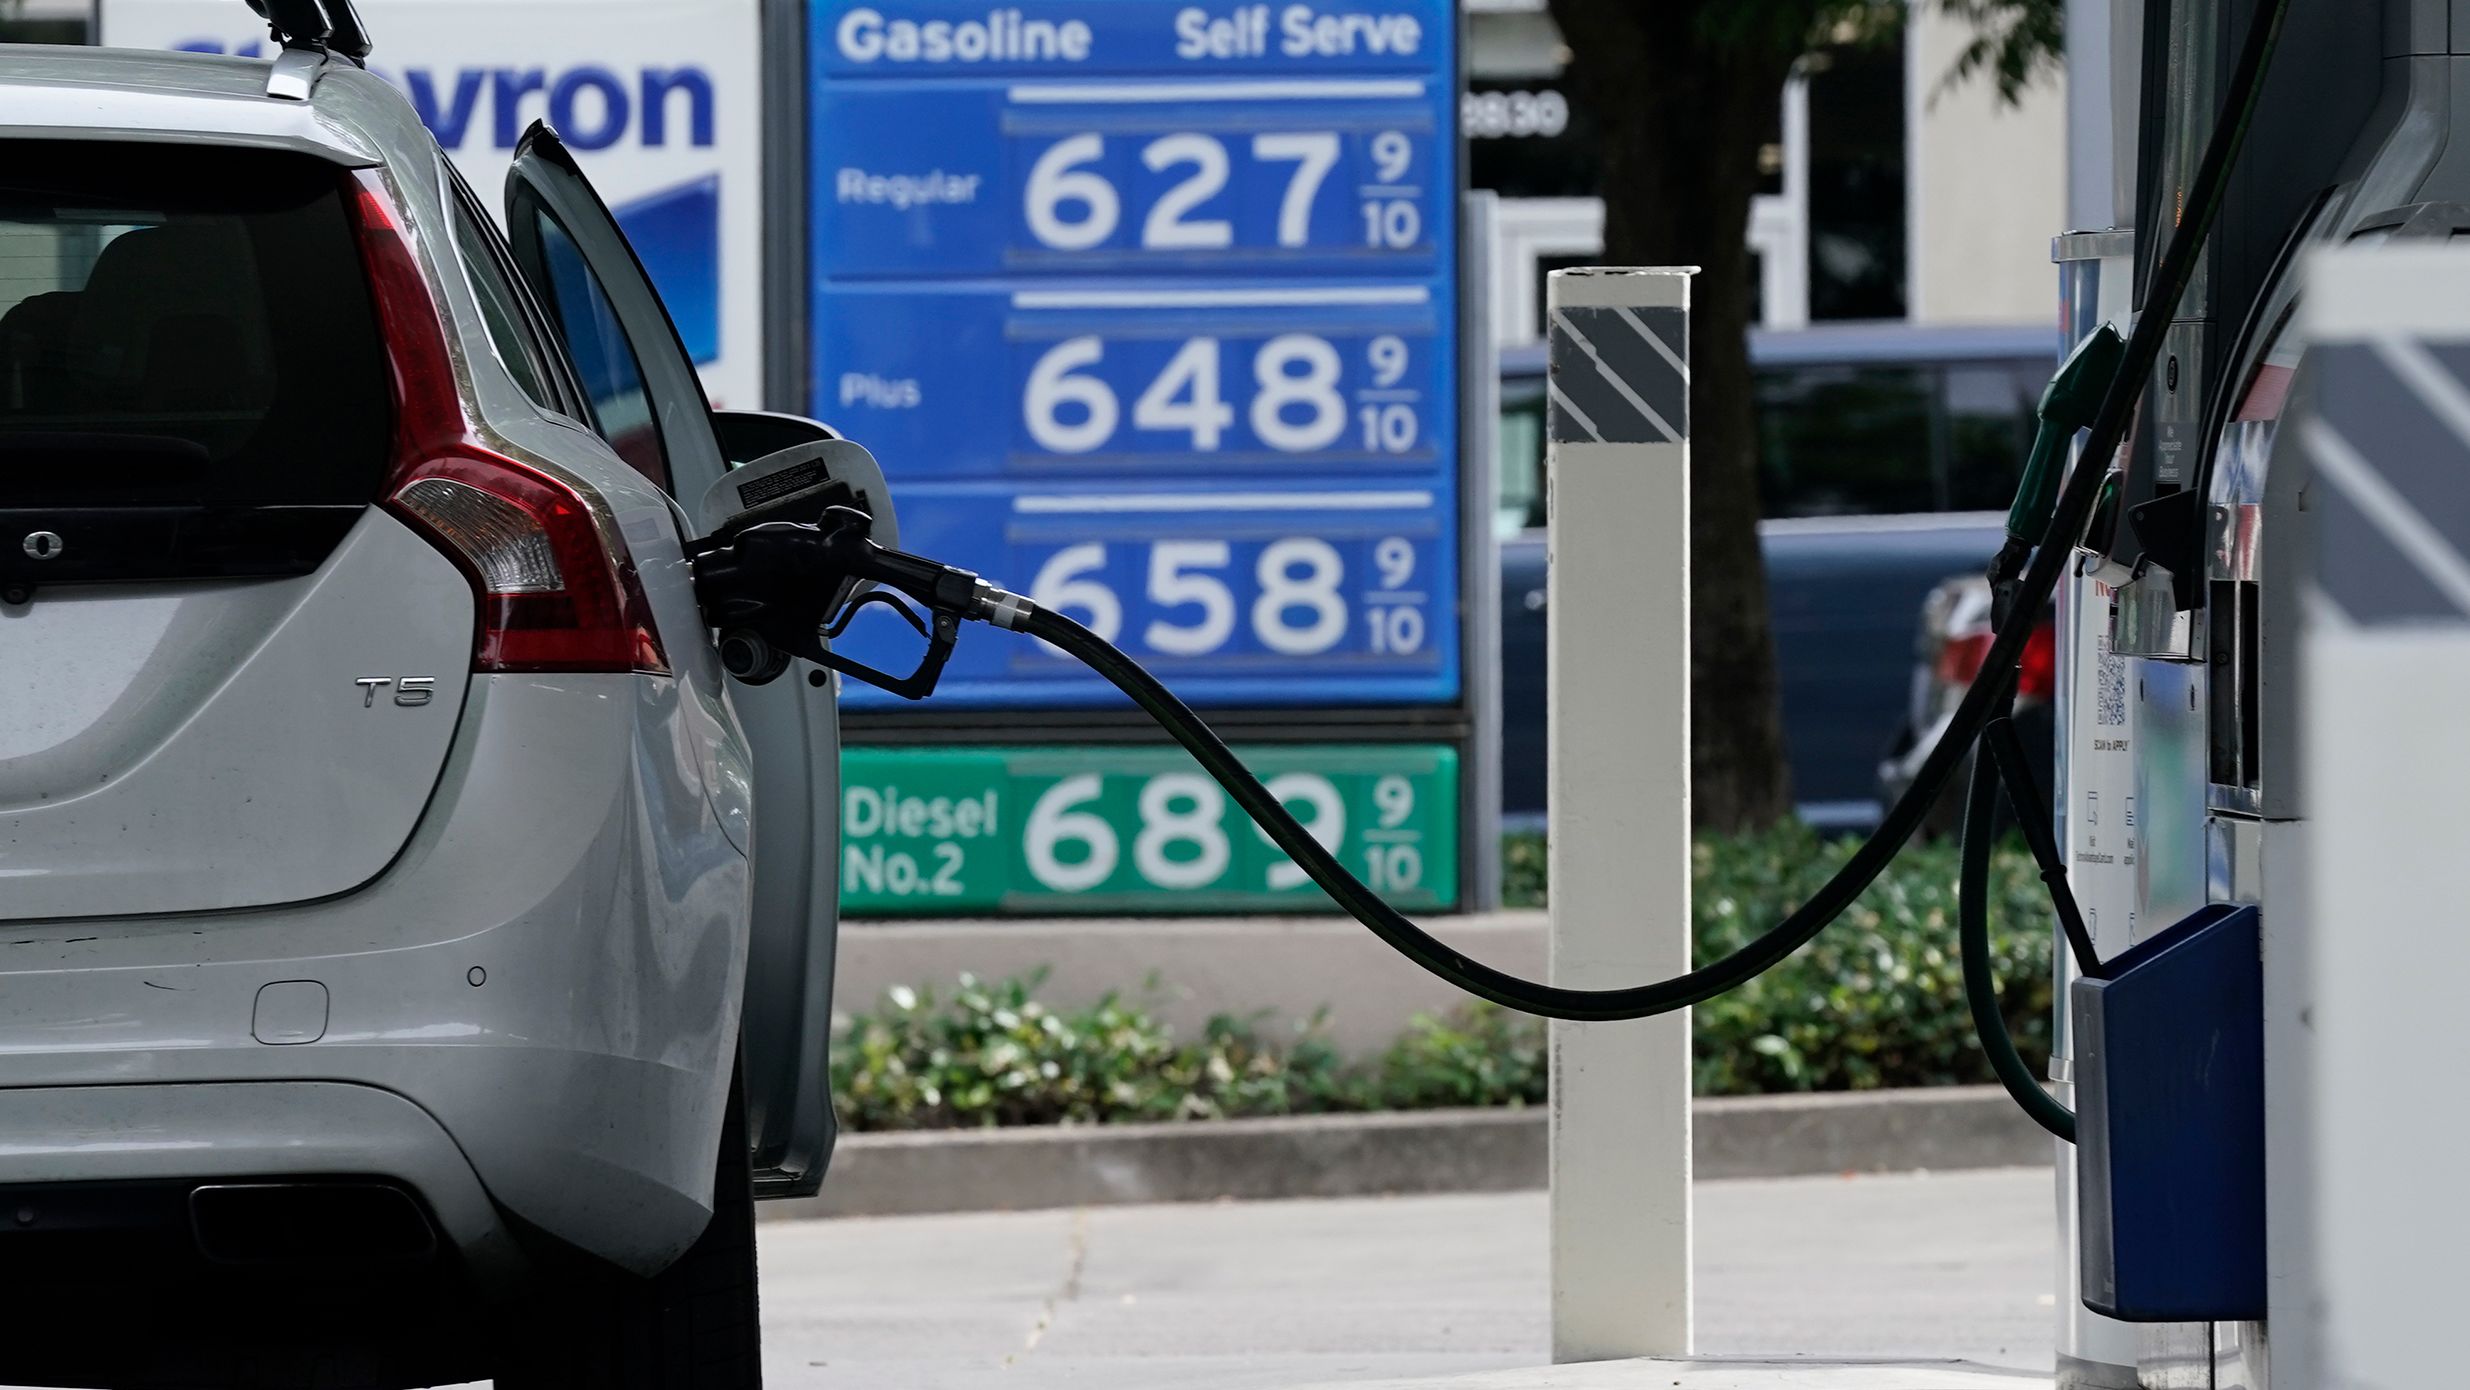 Gas prices over the $6 dollar mark are displayed at a gas station in Sacramento, California, on 